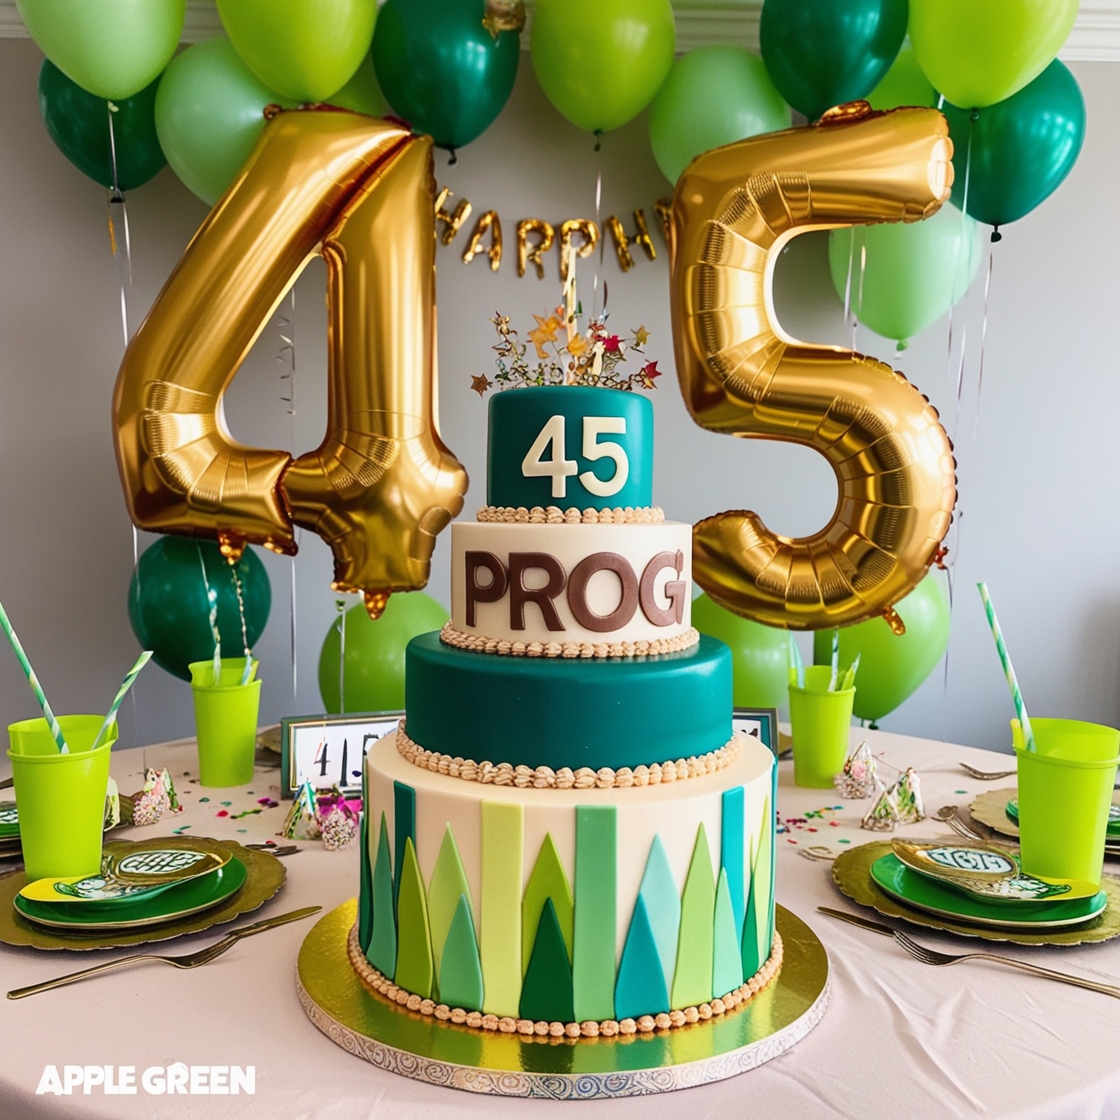 Default_A_birthday_table_decorated_in_apple_green_colors_with_2 (2).jpg